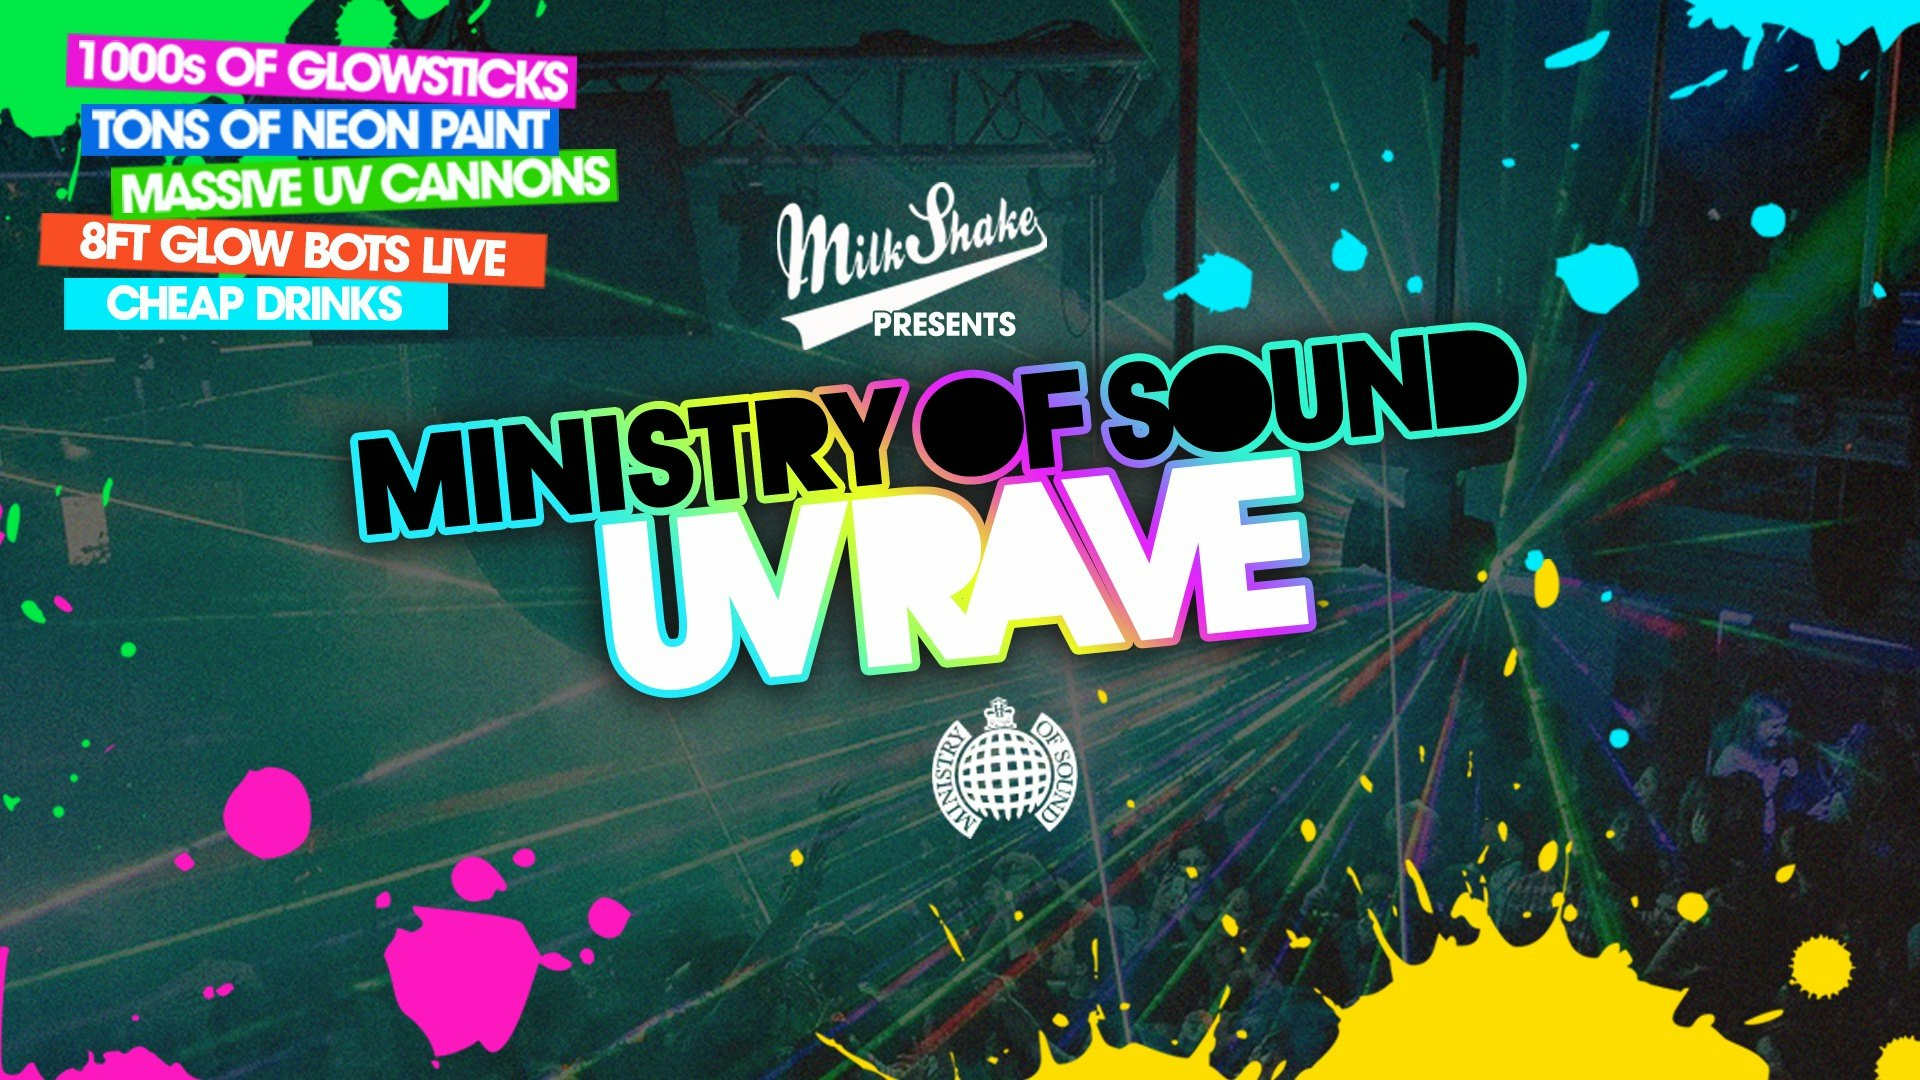 ⚠️ SOLD OUT ⚠️  The Milkshake, Ministry of Sound SUMMER UV Rave ⚡ June 2022 – ⚠️  SOLD OUT  ⚠️